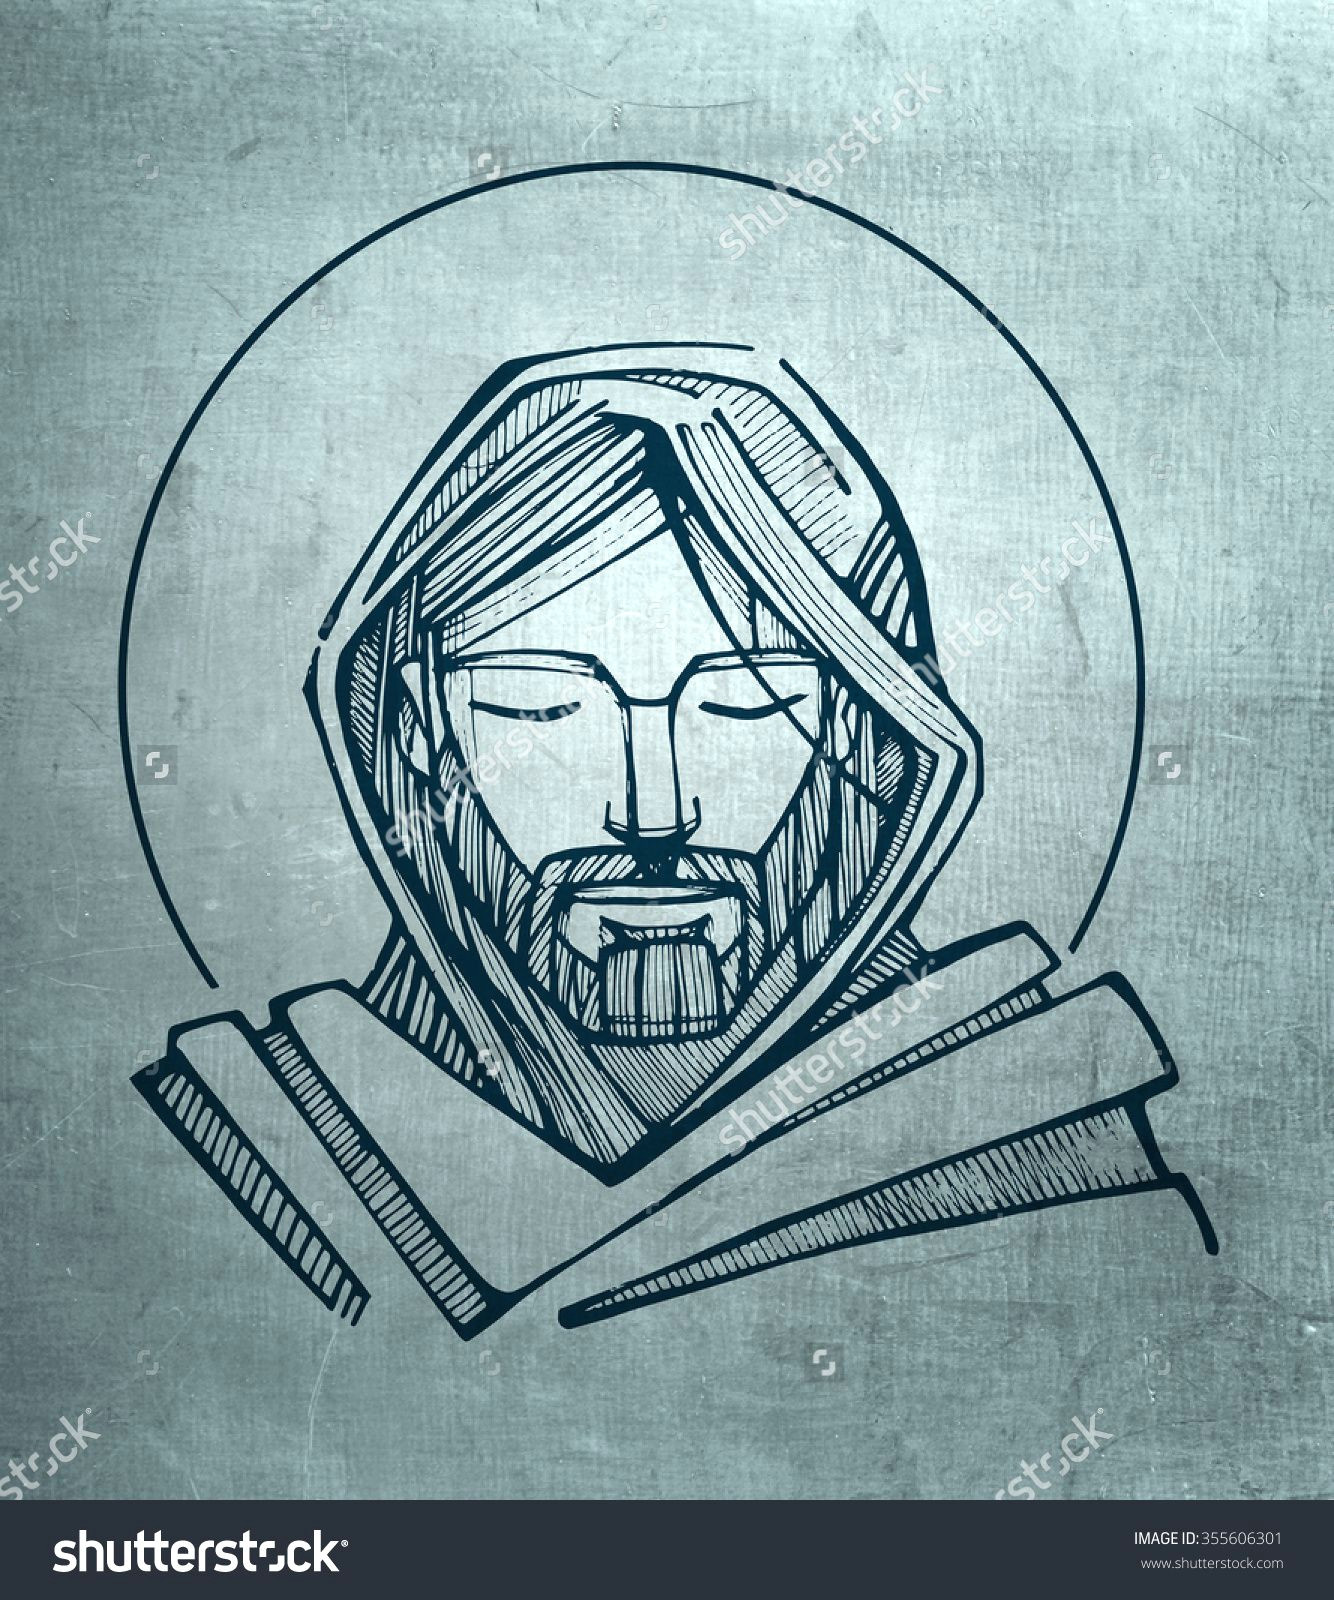 Drawing Of Hands On Face Hand Drawn Illustration or Drawing Of Jesus Christ Serene Face